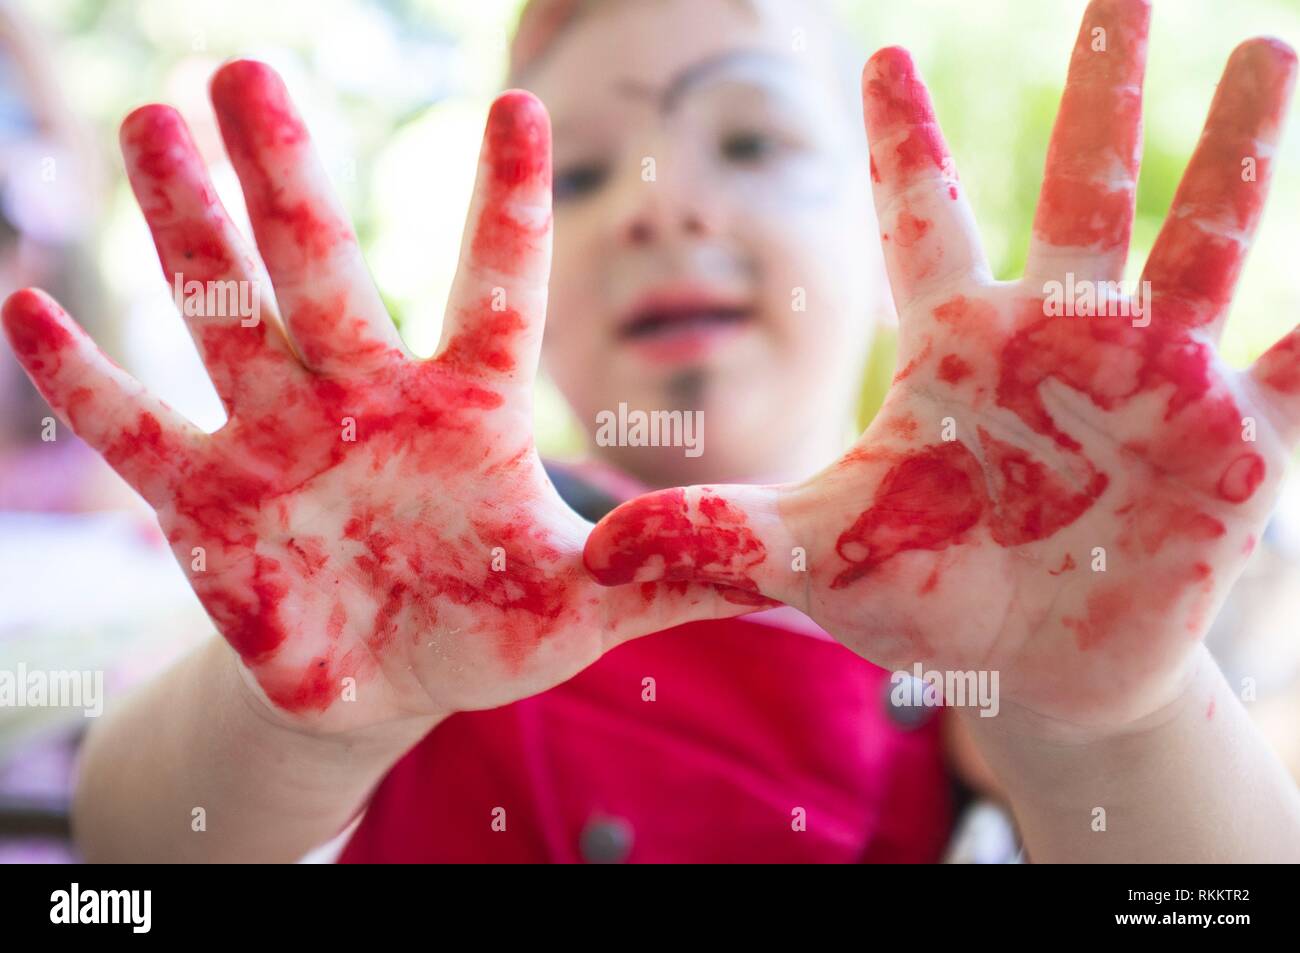 Chid boy showing his red stained hands after arts workshop for children. Closeup. Stock Photo